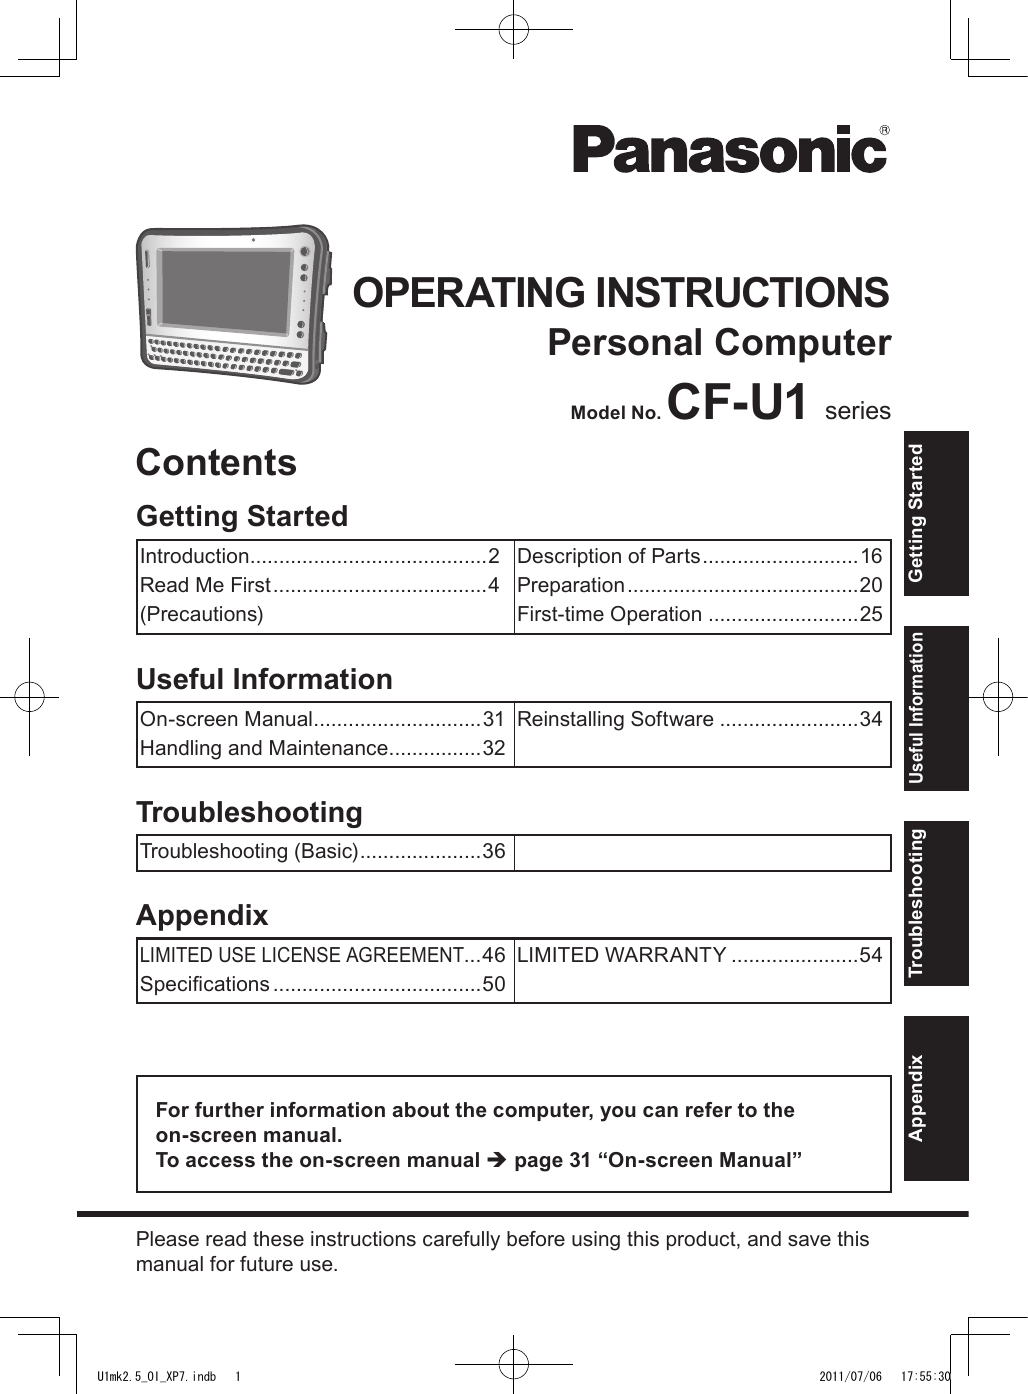 OPERATING INSTRUCTIONSPersonal ComputerModel No. CF-U1 seriesFor further information about the computer, you can refer to the  on-screen manual.To access the on-screen manual è page 31 “On-screen Manual”Please read these instructions carefully before using this product, and save this manual for future use.AppendixLIMITED USE LICENSE AGREEMENT...46Specications ....................................50LIMITED WARRANTY ......................54TroubleshootingTroubleshooting (Basic) .....................36Useful InformationOn-screen Manual .............................31Handling and Maintenance ................32Reinstalling Software ........................34Getting StartedIntroduction .........................................2Read Me First .....................................4(Precautions)Description of Parts ...........................16Preparation ........................................20First-time Operation ..........................25ContentsGetting StartedUseful InformationTroubleshootingAppendixU1mk2.5_OI_XP7.indb   1 2011/07/06   17:55:30